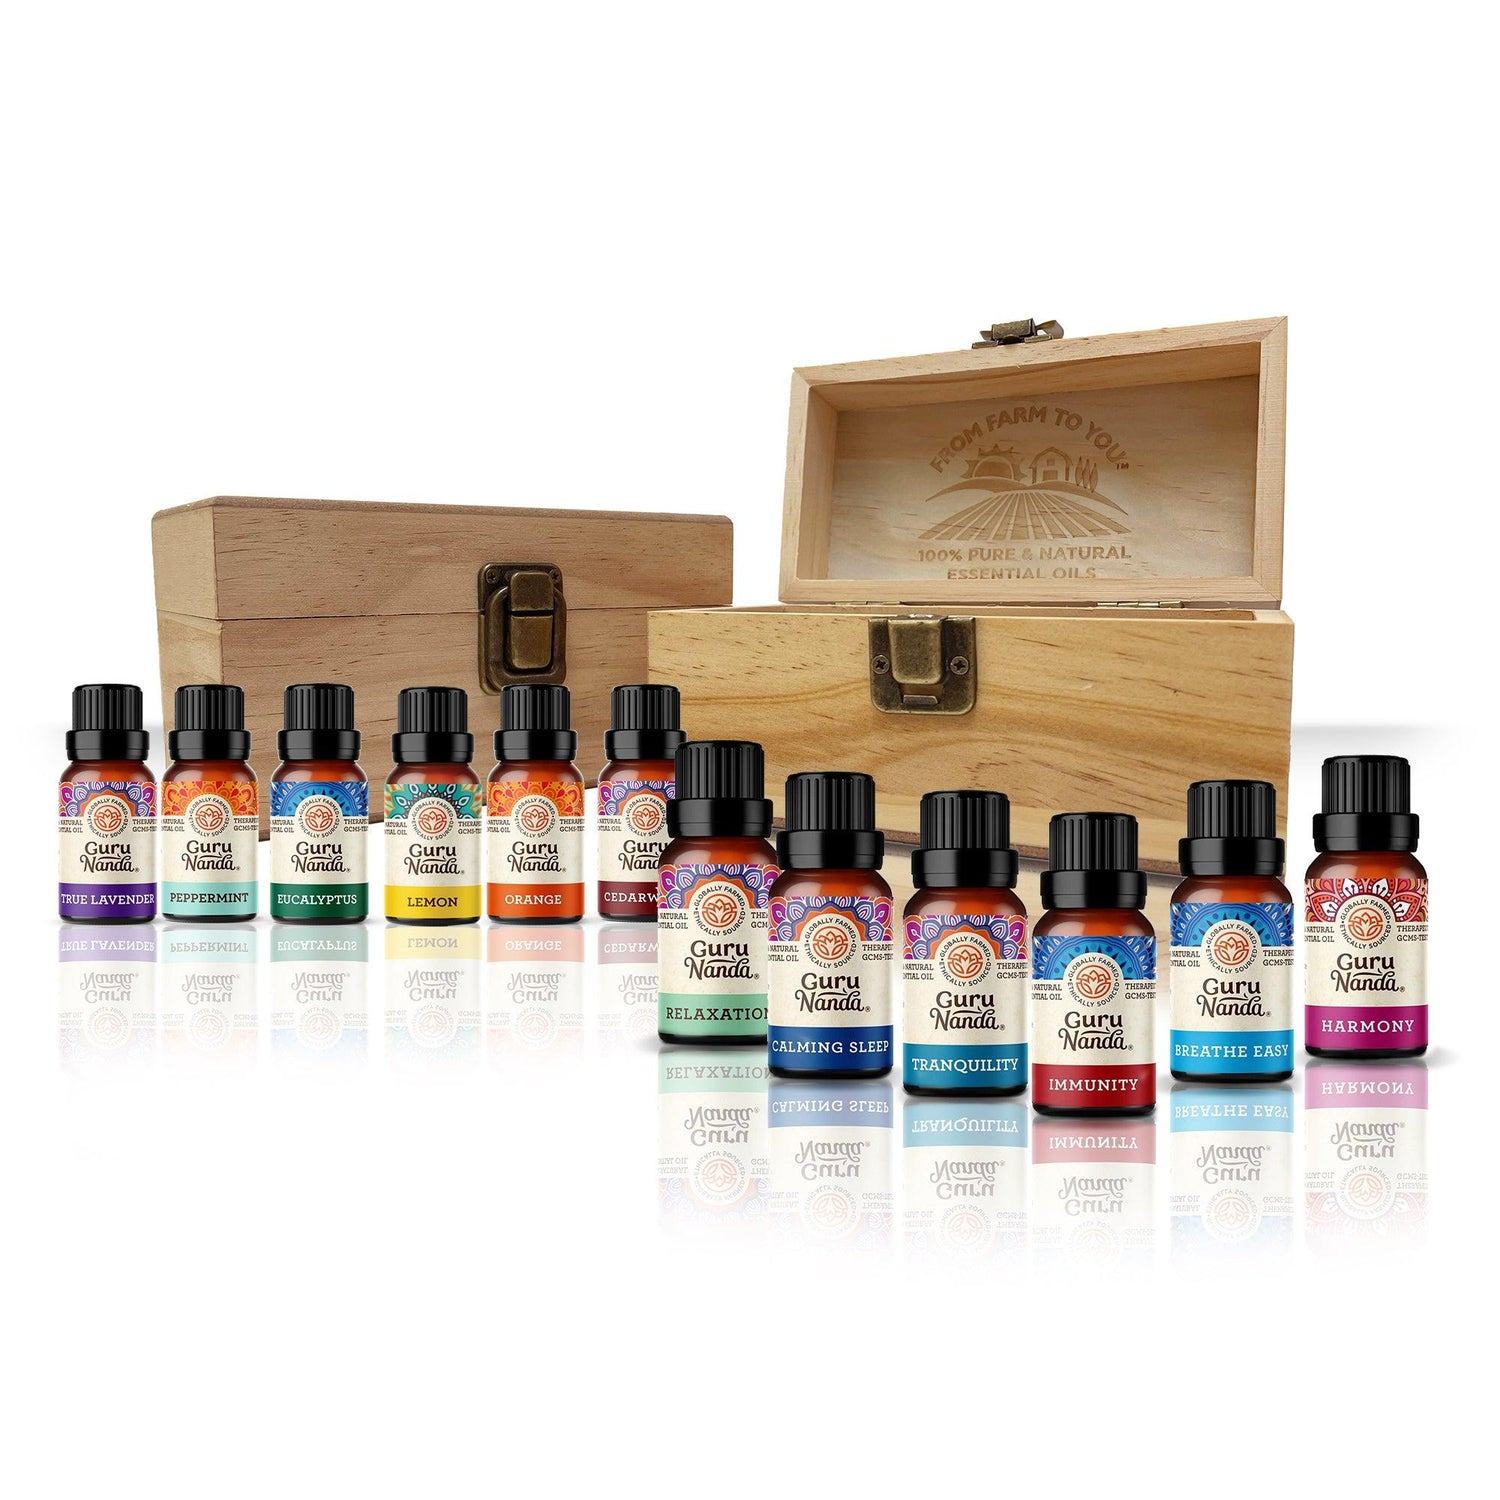 Essential Oil Sets Top 6 Oils for Aromatherapy Oil Blends for